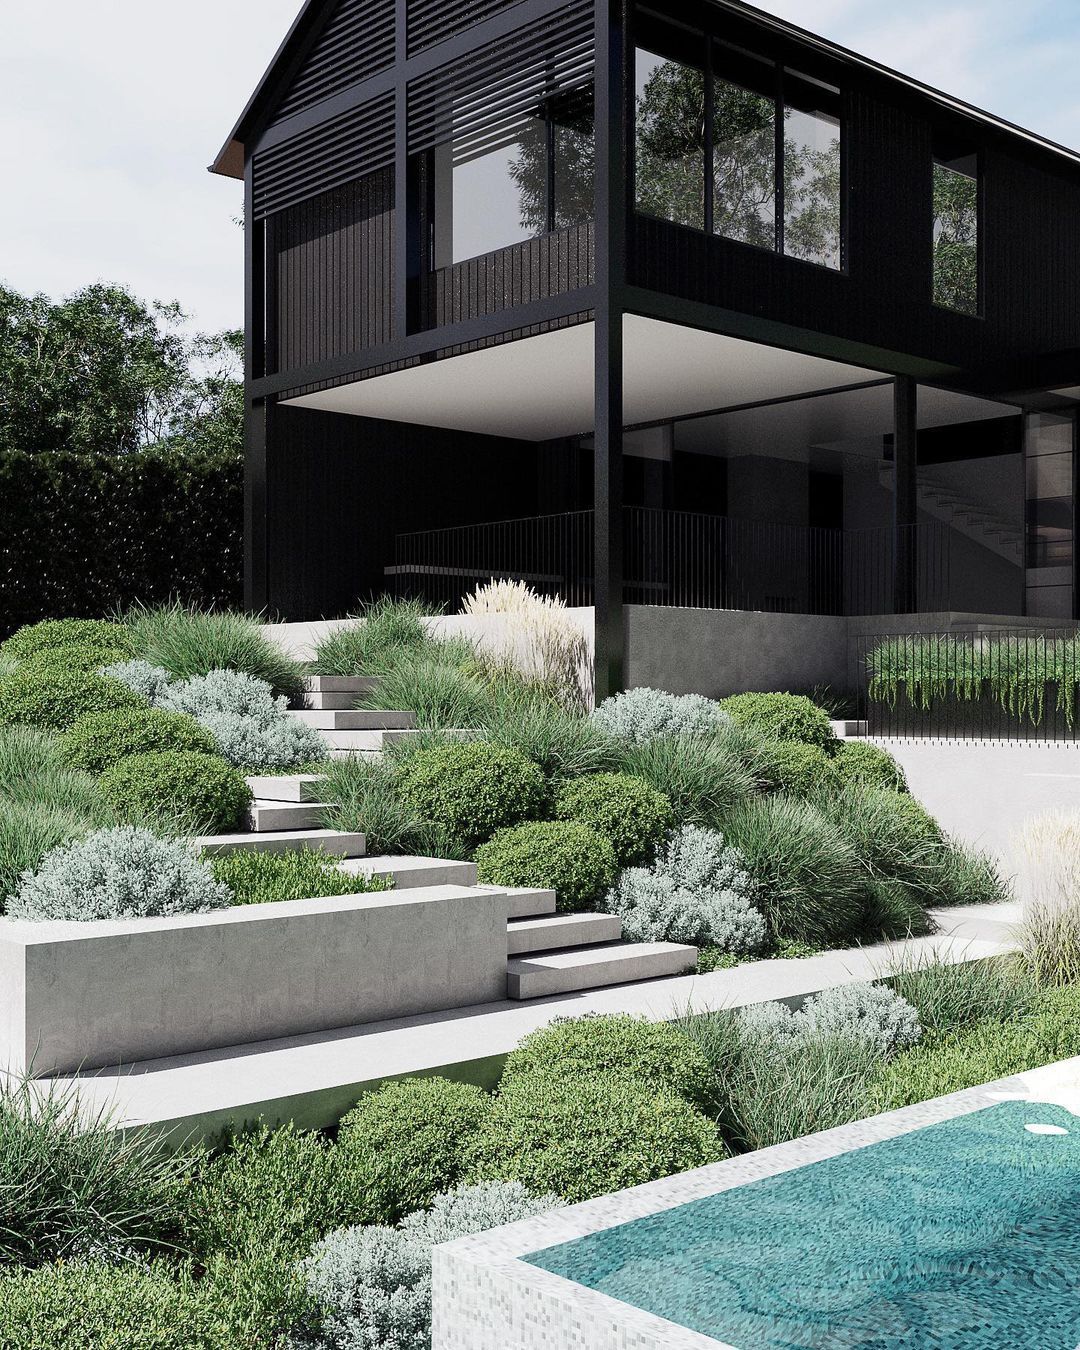 Creating Stunning Landscape Gardens: A Guide to Designing Beautiful Outdoor Spaces